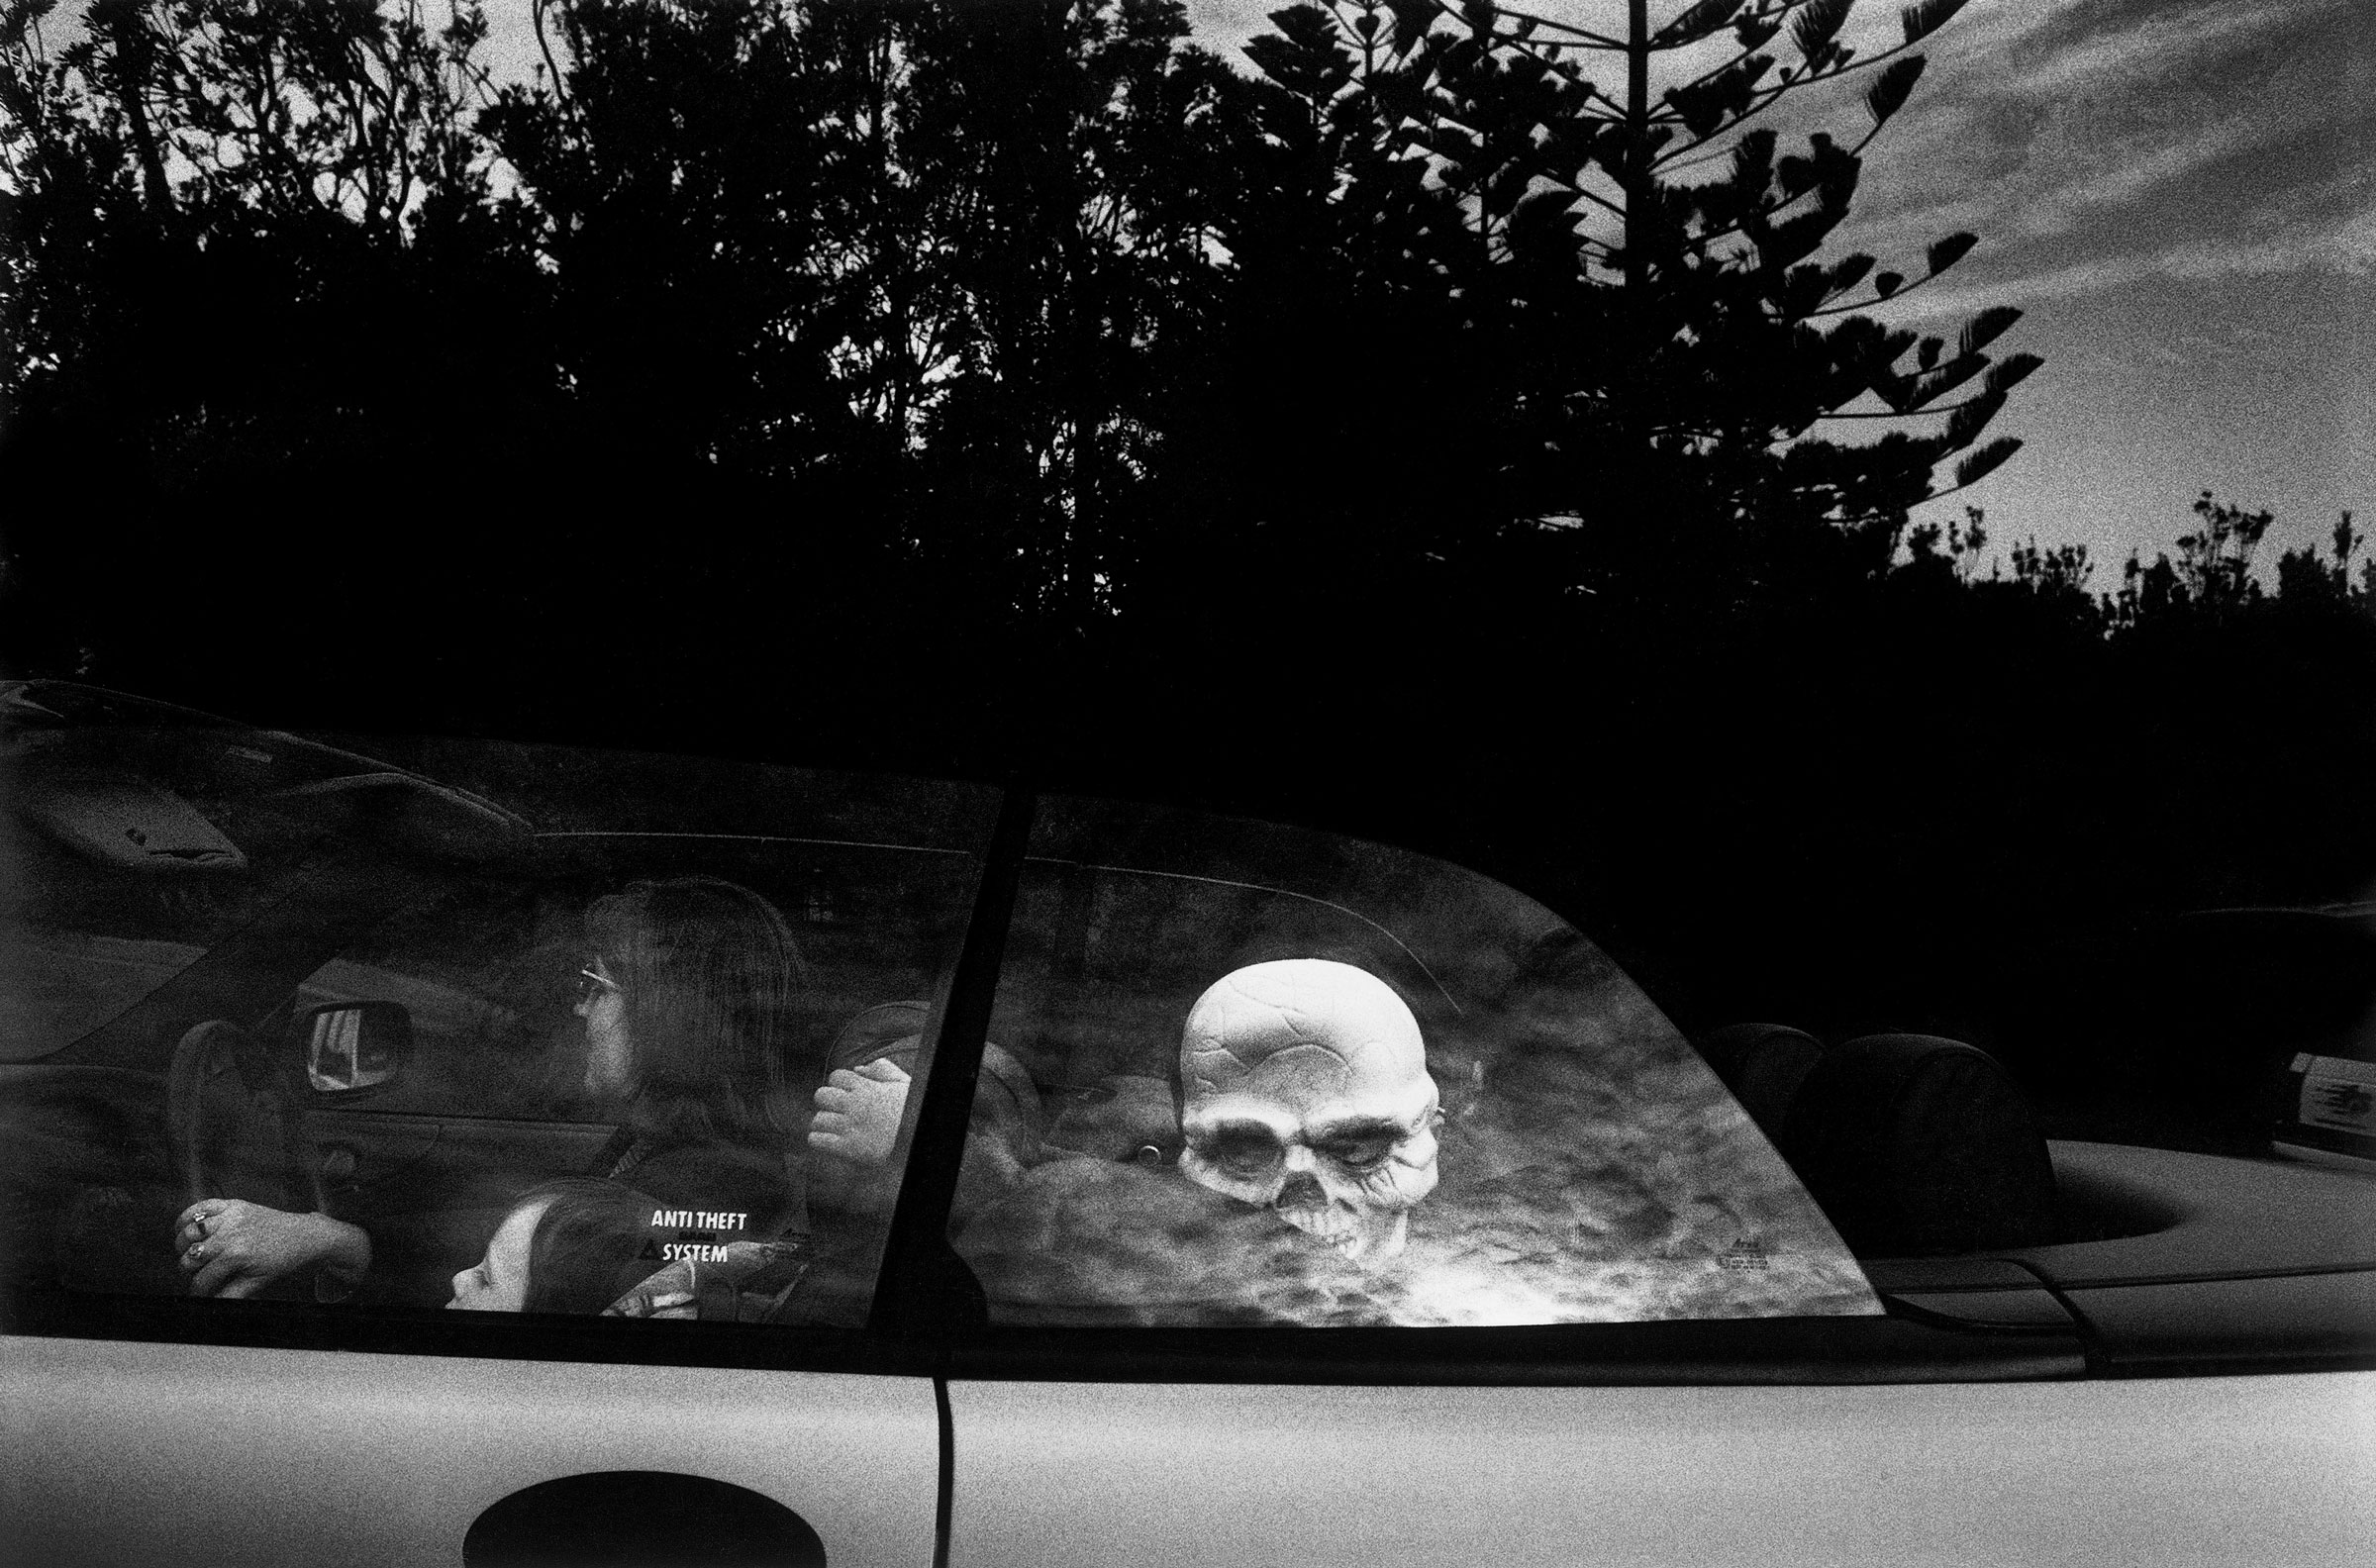 A child with a skeleton mask arrives at a fancy dress party in Watsons Bay, Sydney, Australia in 1998. (Trent Parke—Magnum Photos)